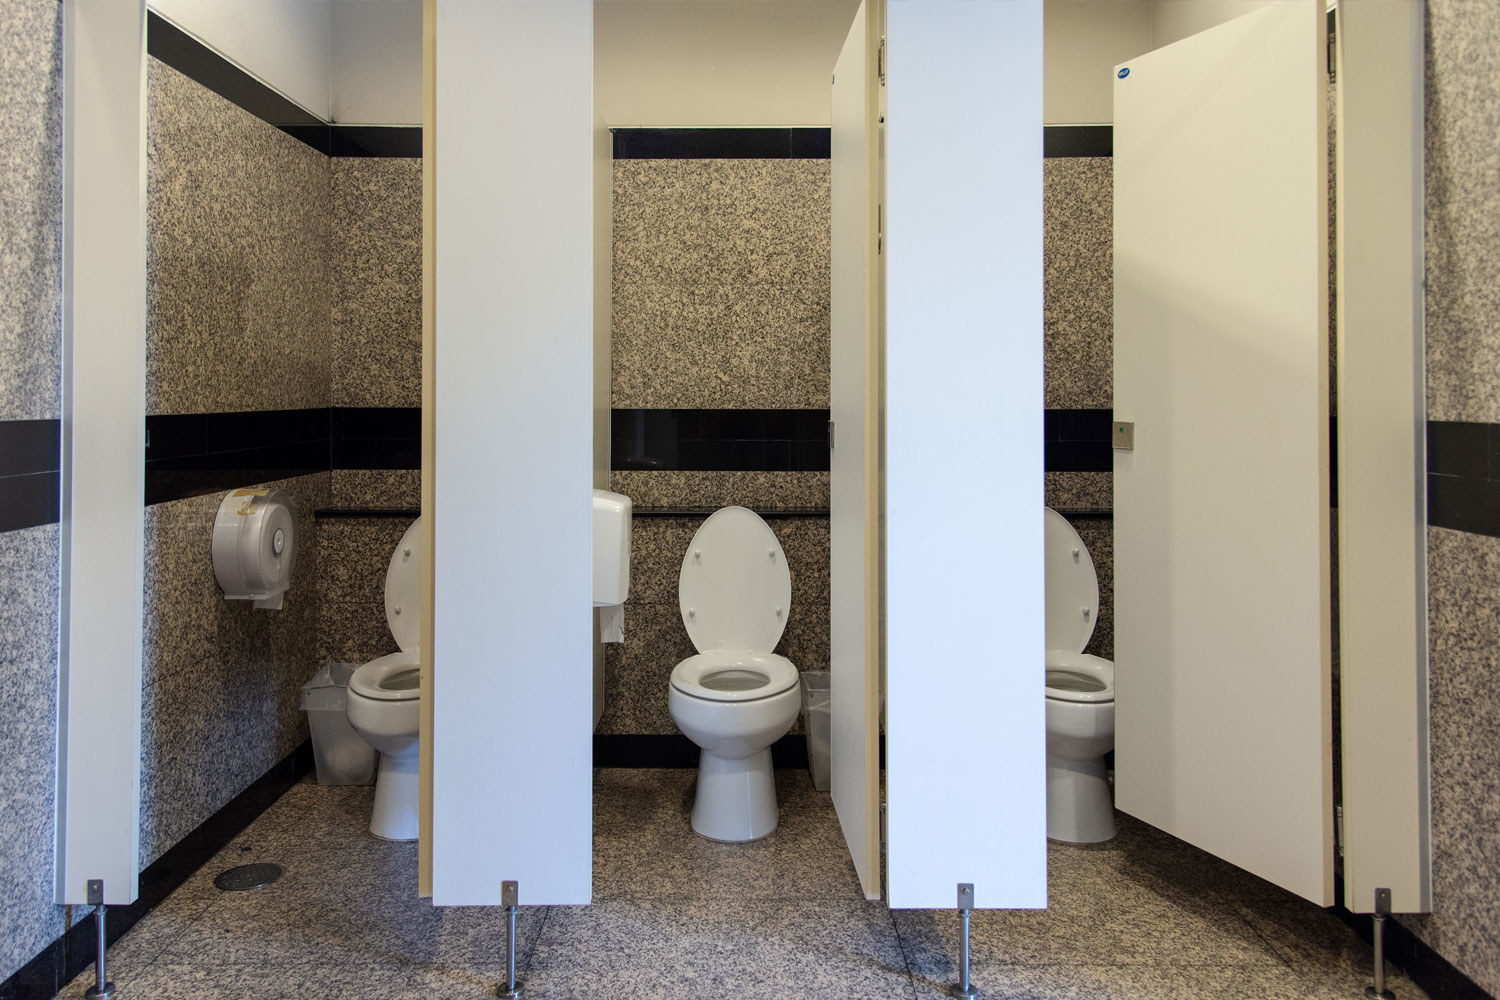 A public restroom with bathroom stalls.